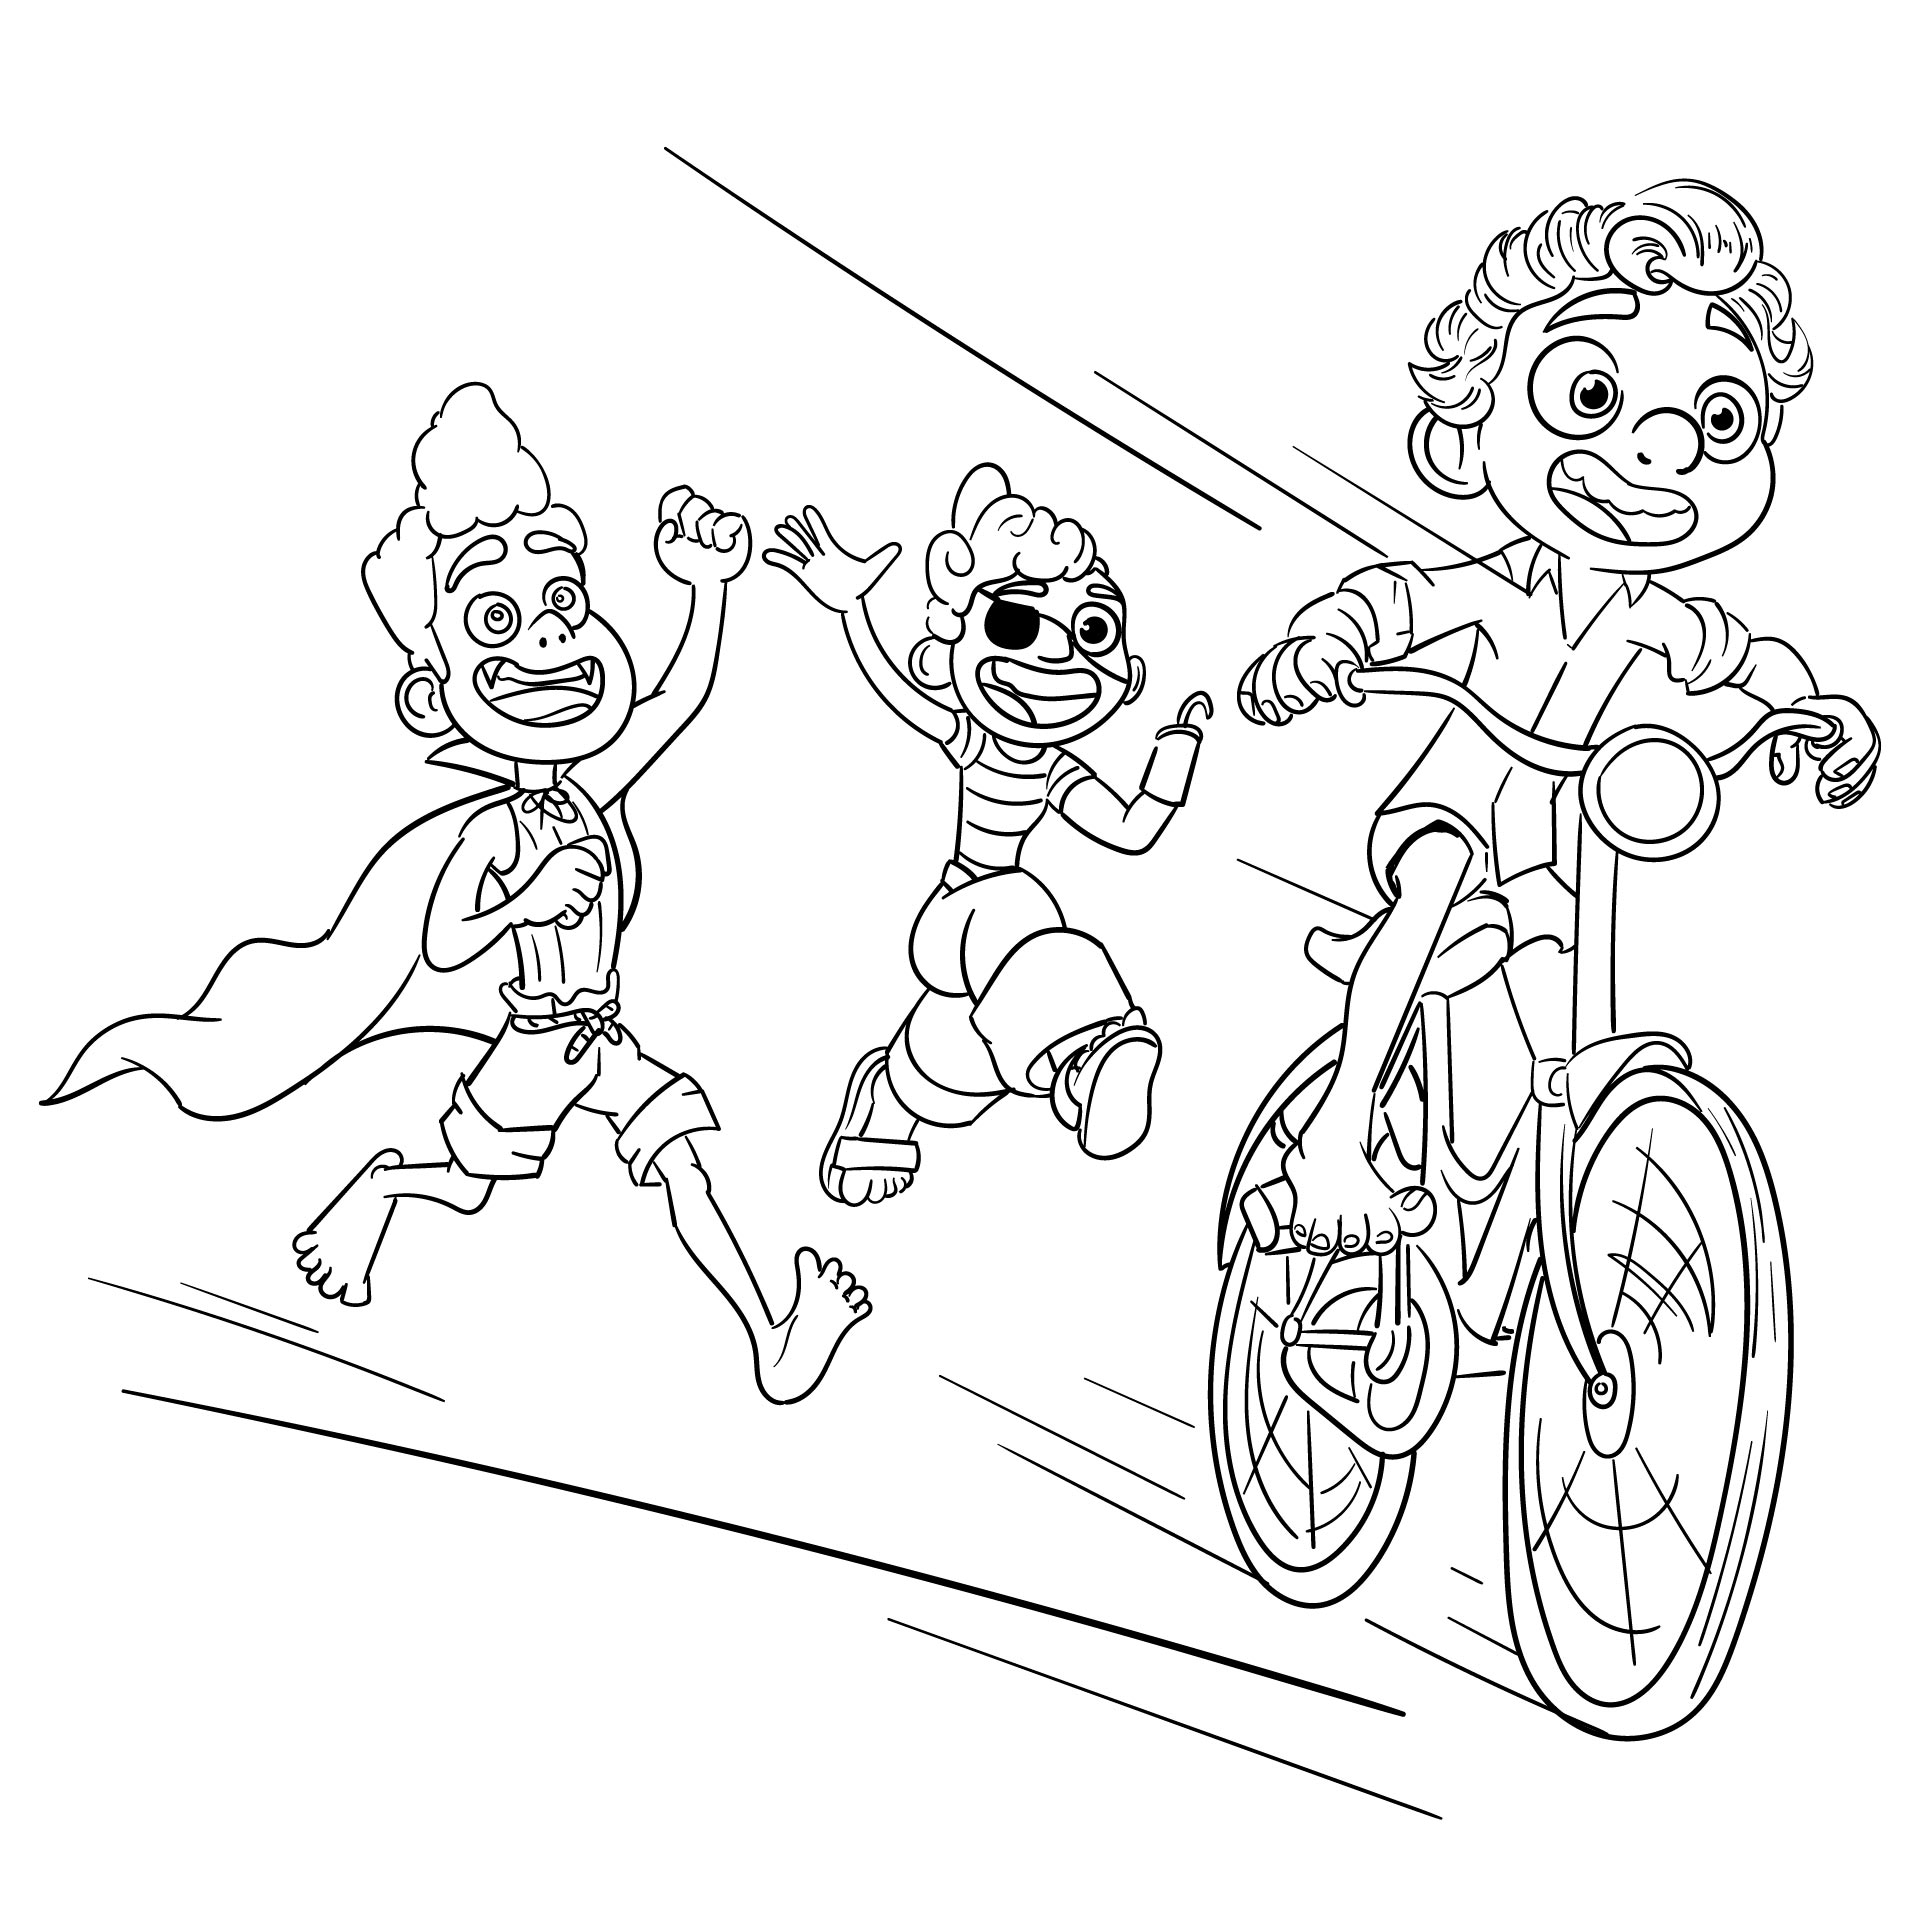 Halloween Disney Characters Coloring Page For Kids Printable Free